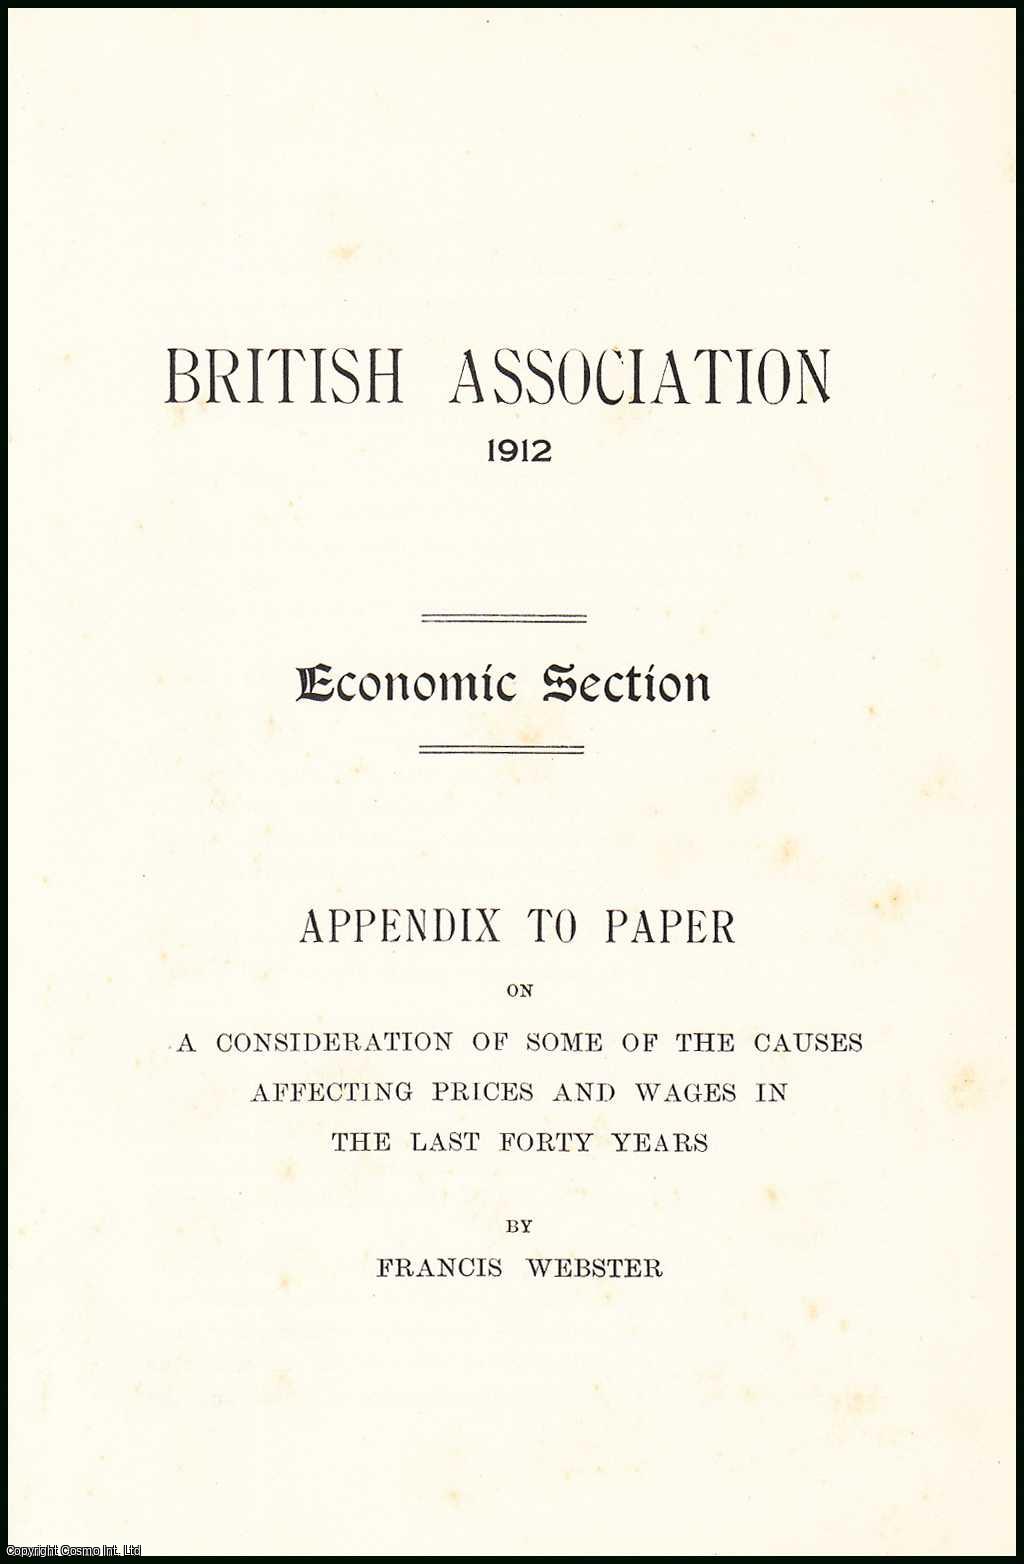 Francis Webster - A Consideration of some of the Causes Affecting Prices & Wages in the last Forty Years : Appendix. An uncommon original article from The British Association for The Advancement of Science report, 1912.